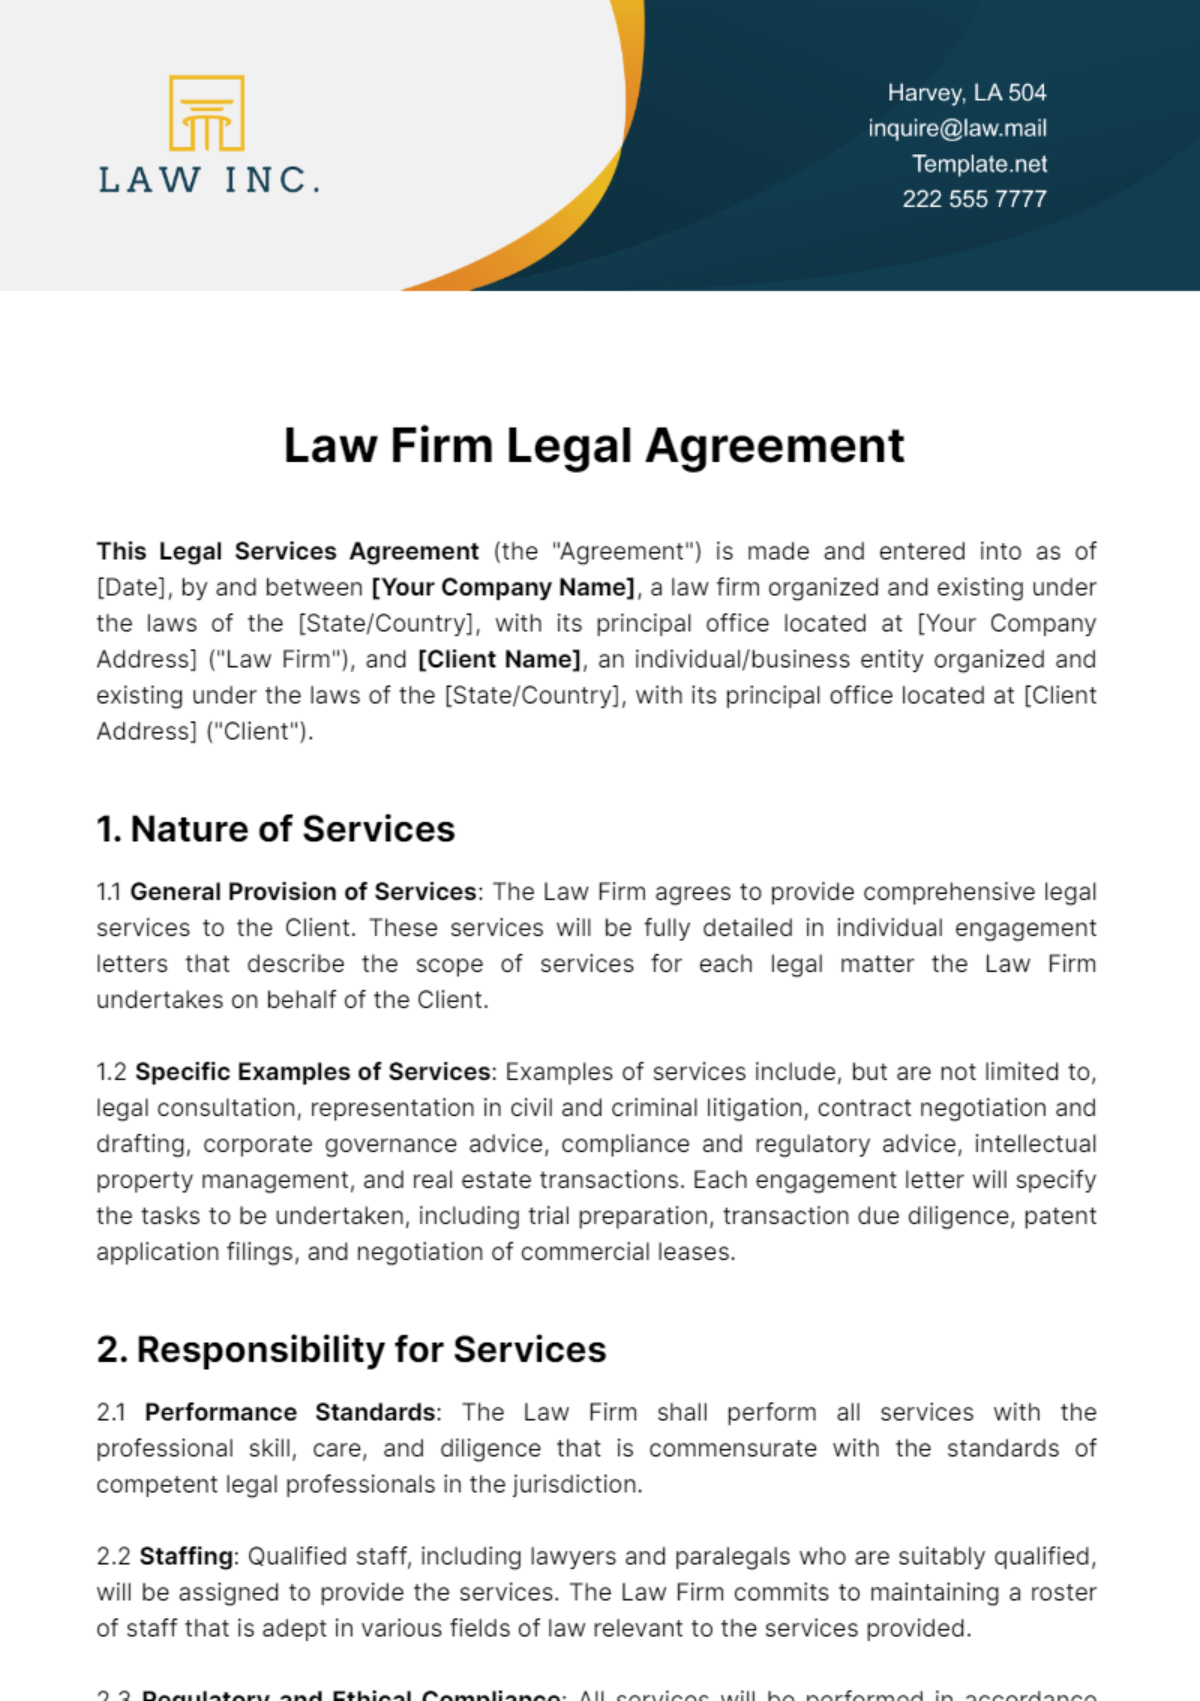 Law Firm Legal Agreement Template